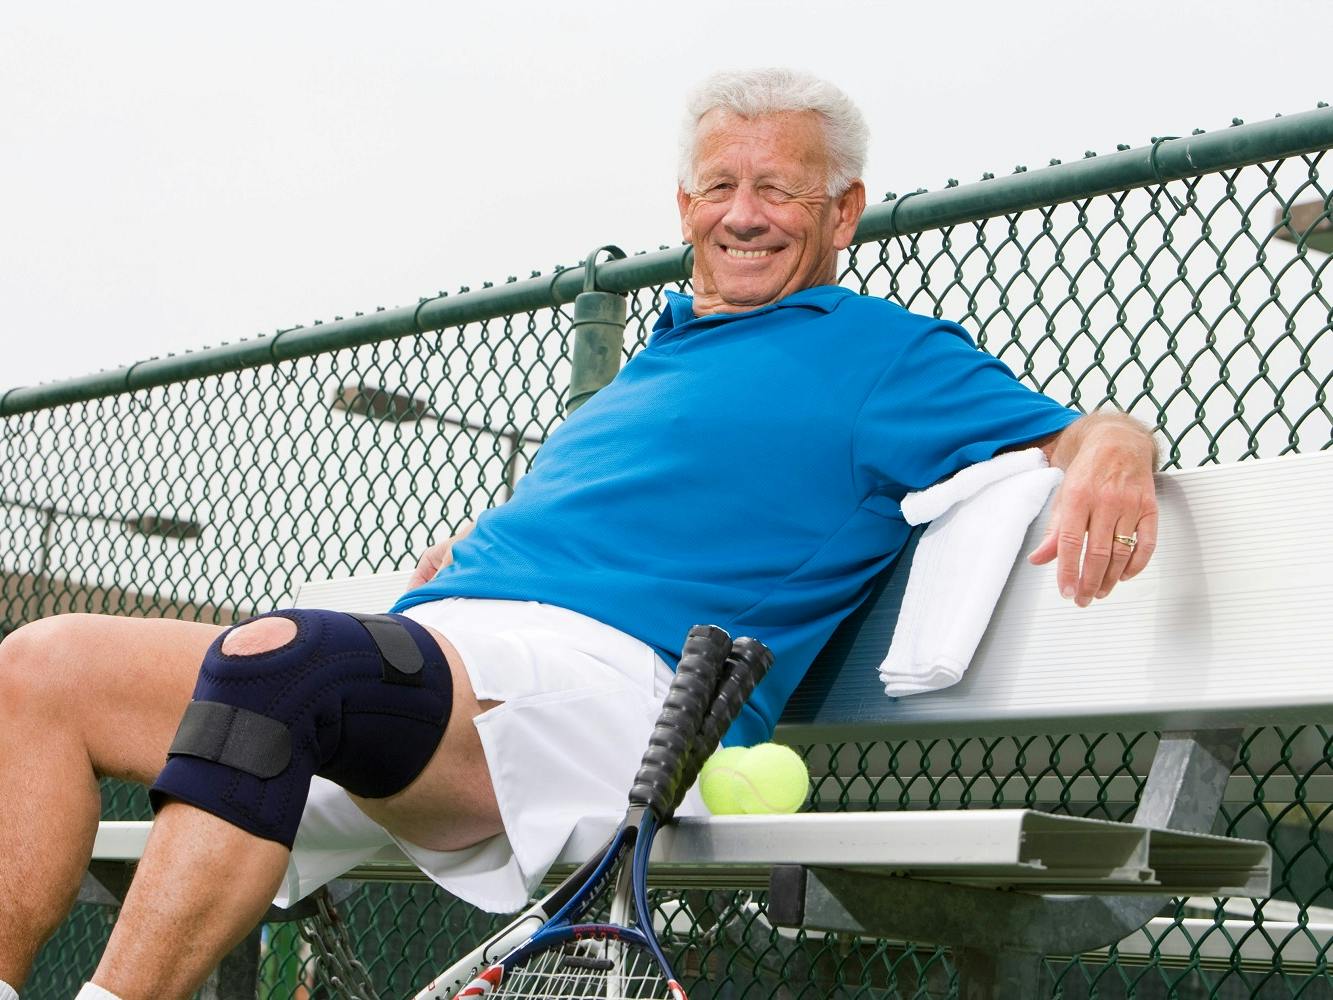 Does Medicare Cover Knee Braces?